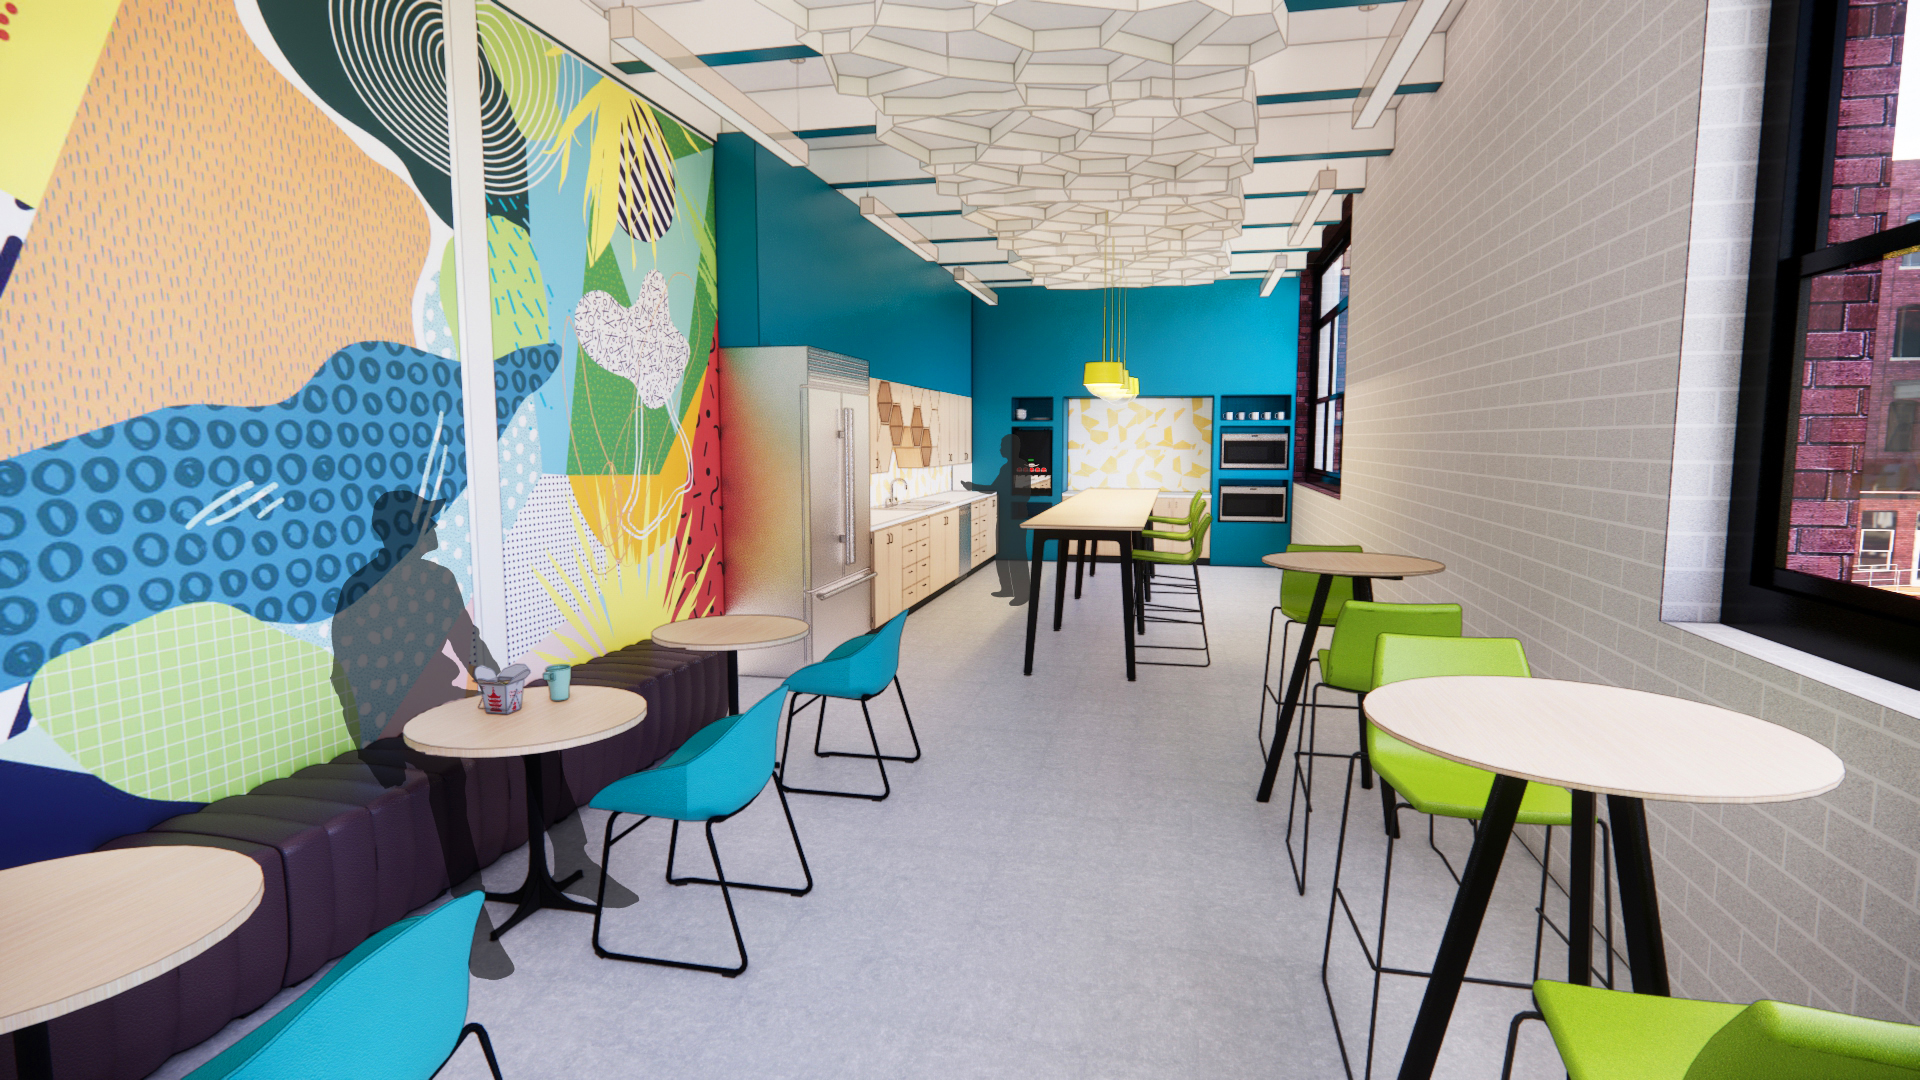 A break room design with a colorful, abstract design on the walls.